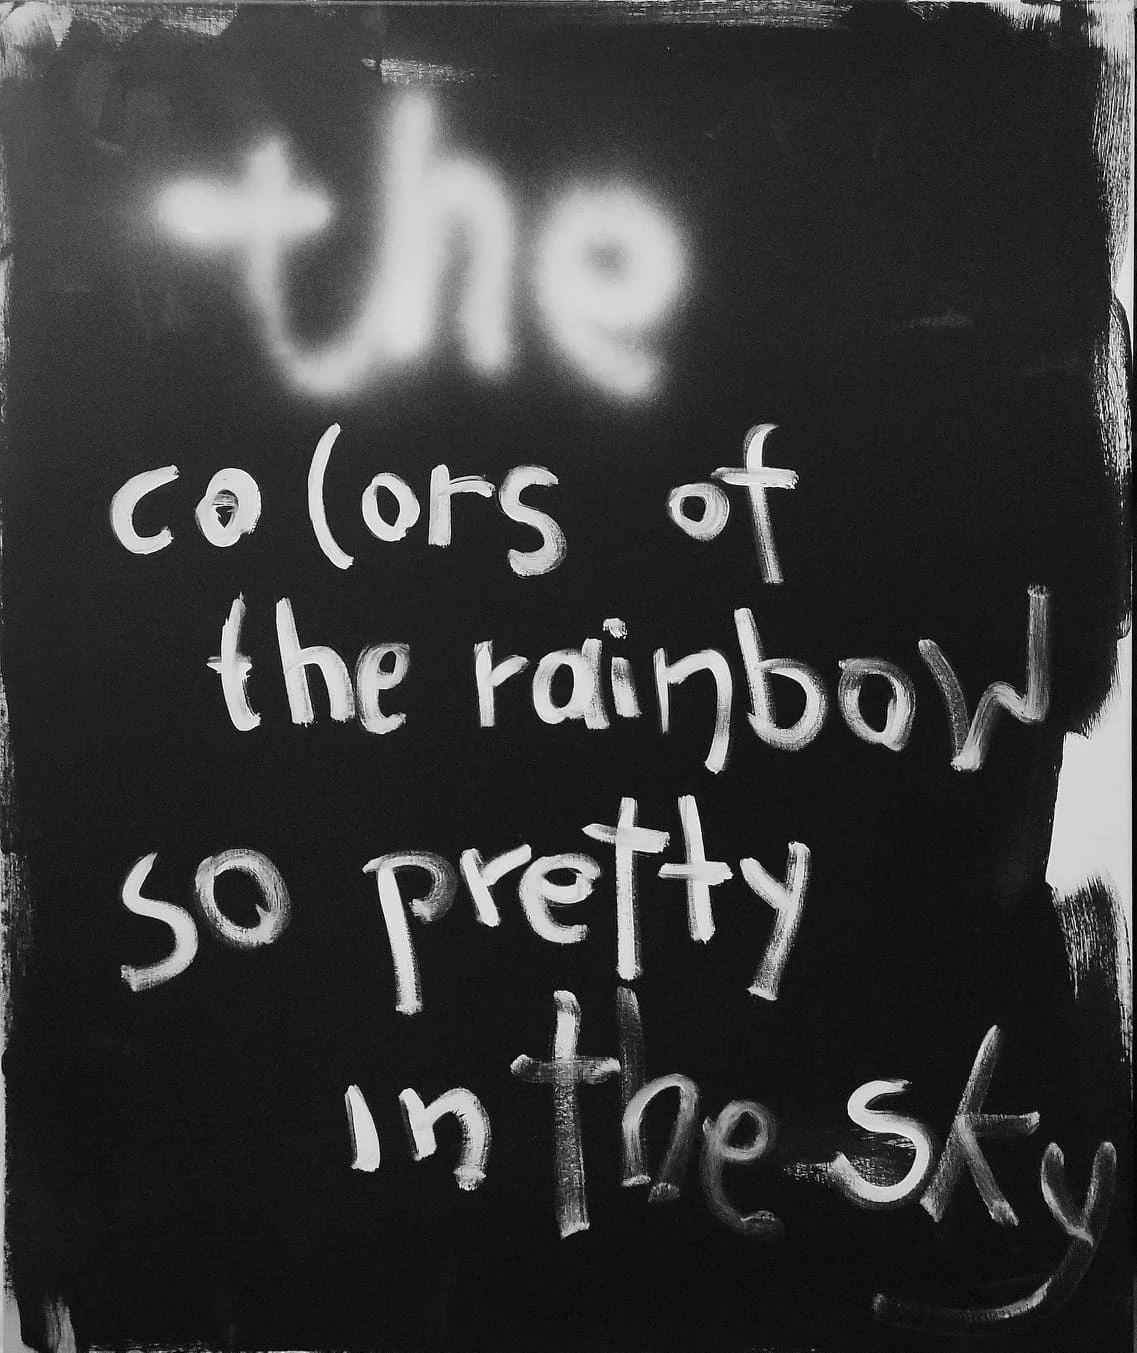 the colors of the rainbow so pretty in the sky